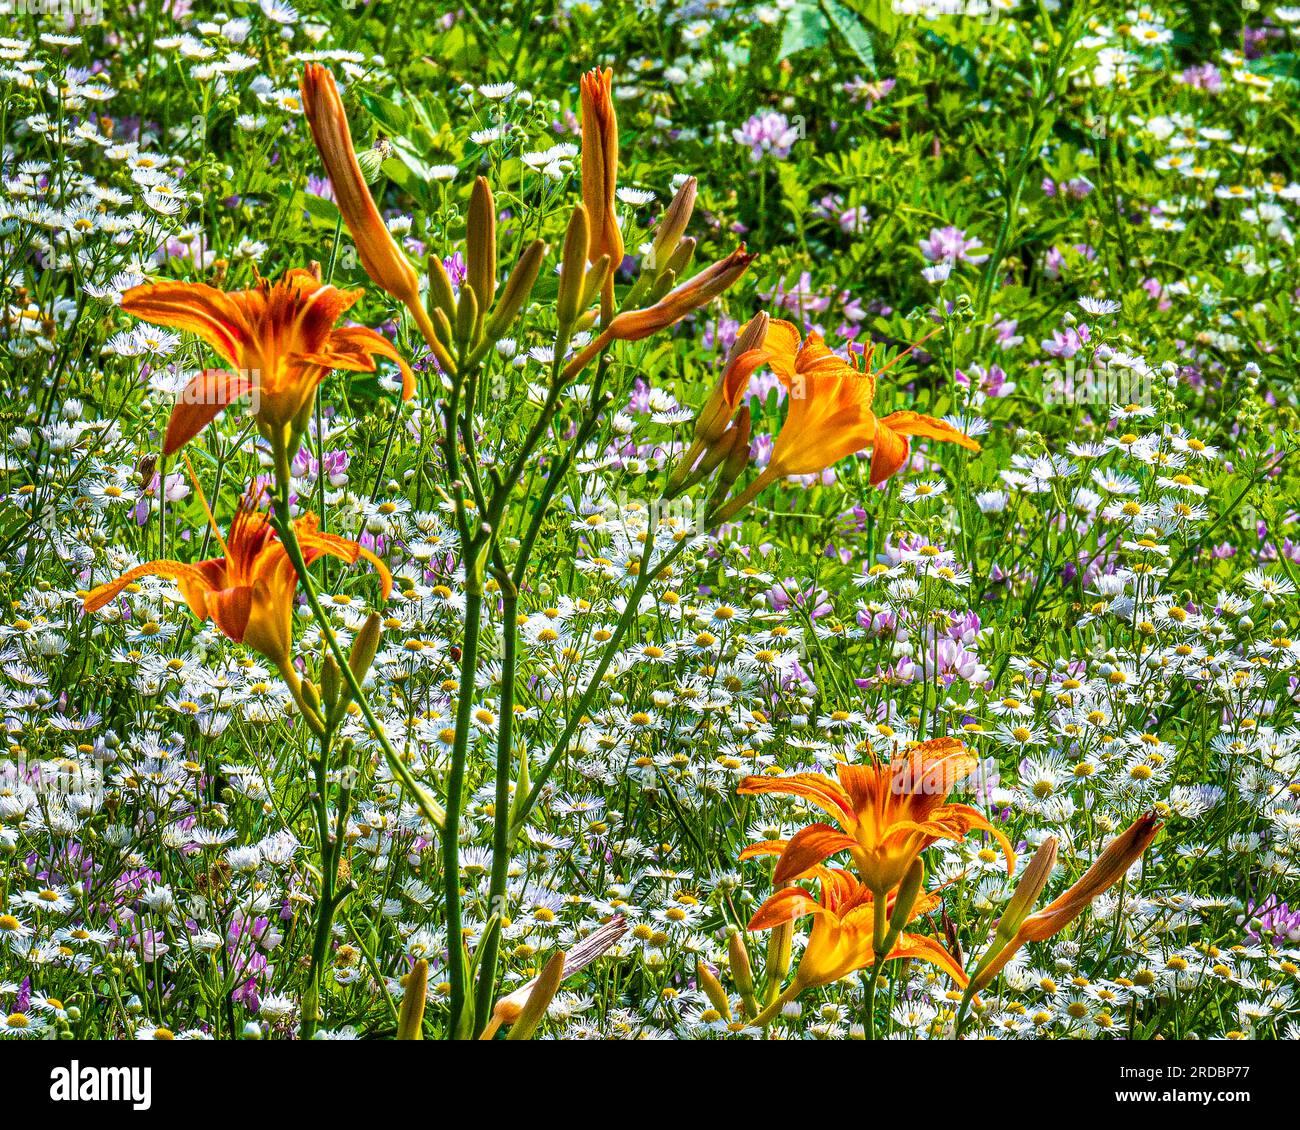 Forest vegetation. Glade of flowers. Walking through the forest in Canada, you can meet lush, colourful vegetation. Stock Photo